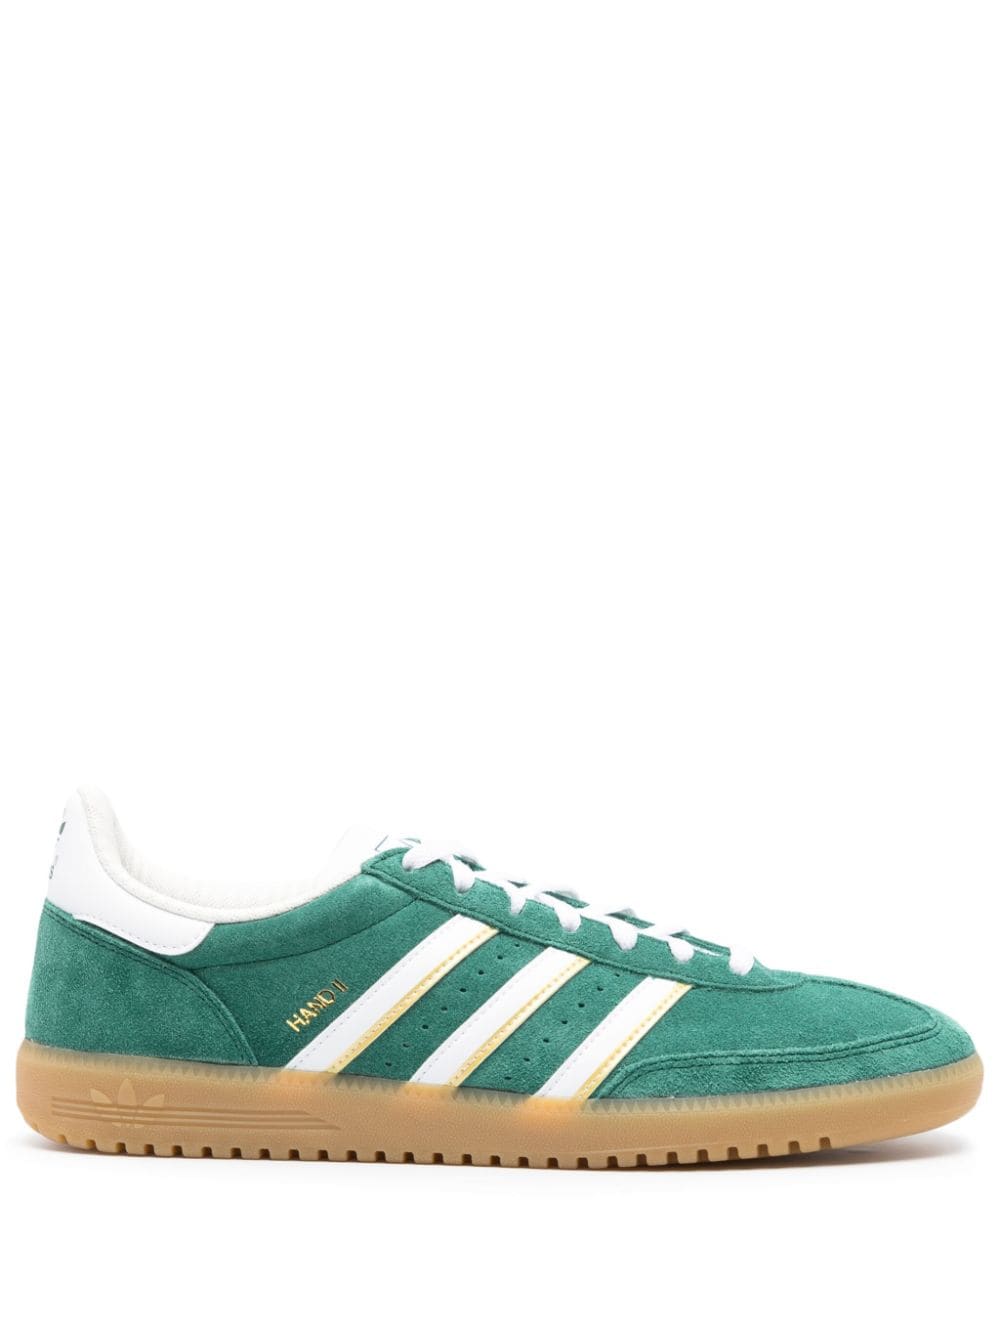 adidas Hand 2 lace-up suede sneakers - Green von adidas